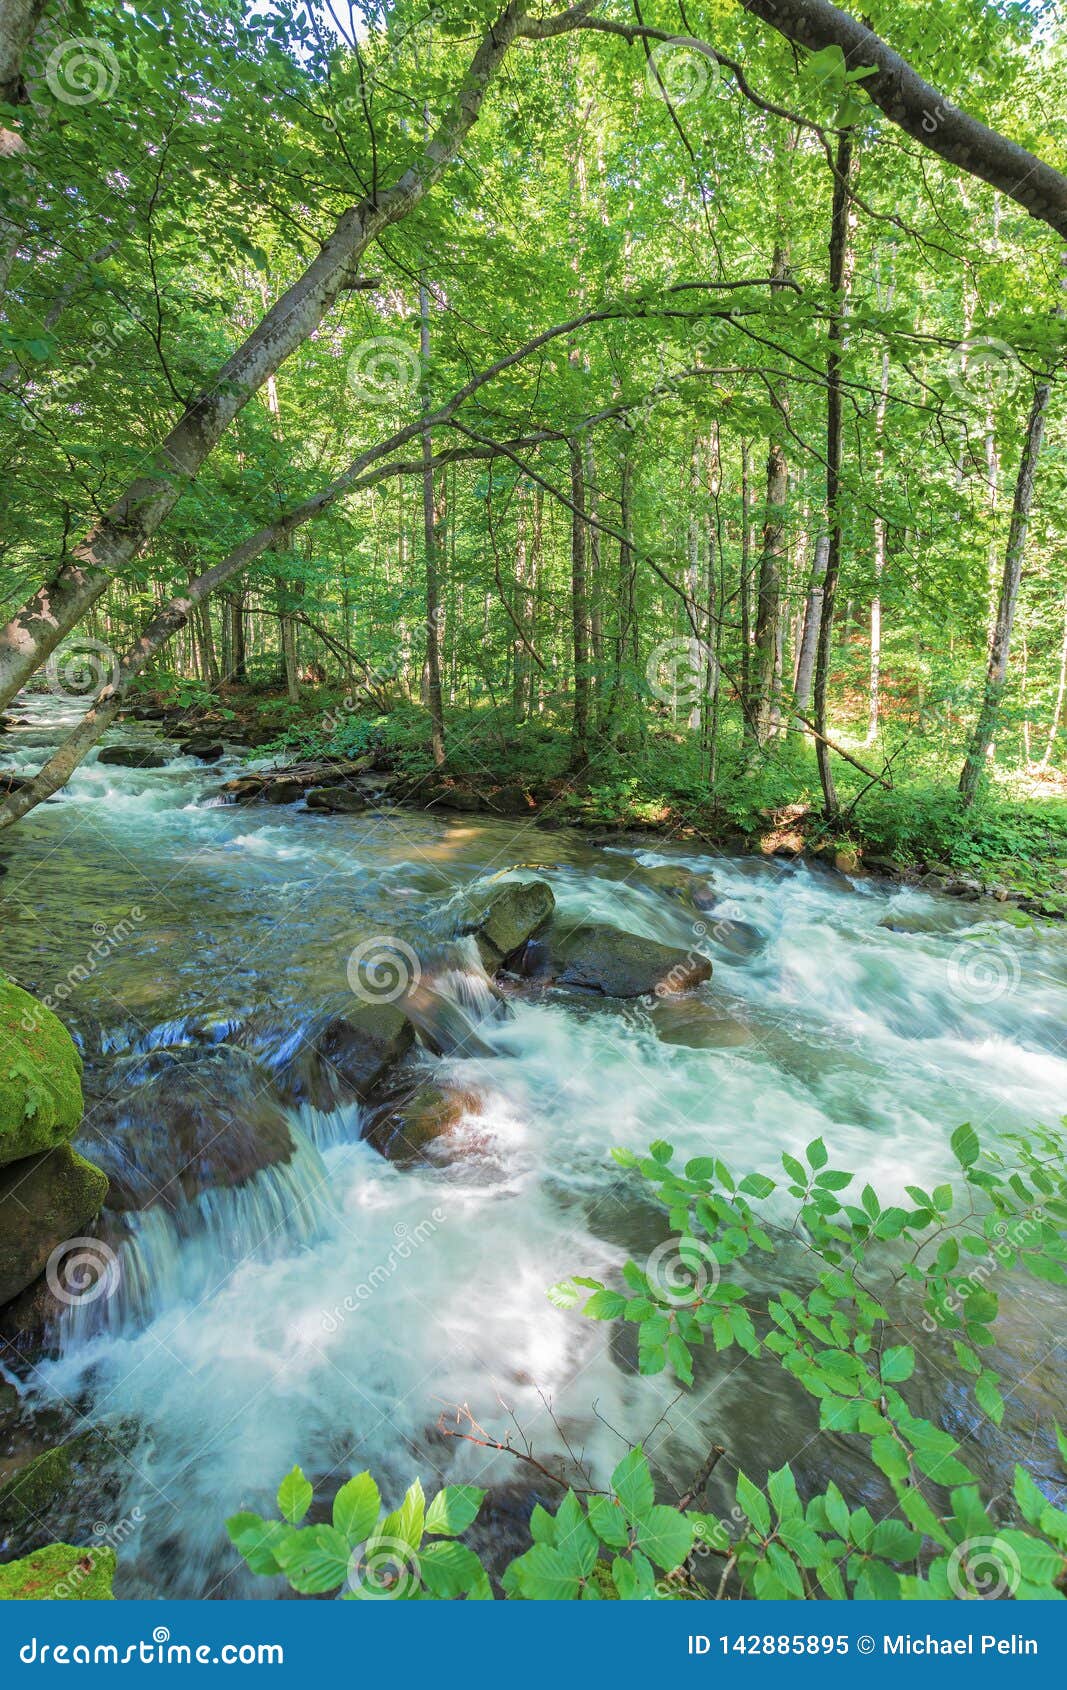 Bank Of The Forest River Stock Image Image Of Exposure 142885895